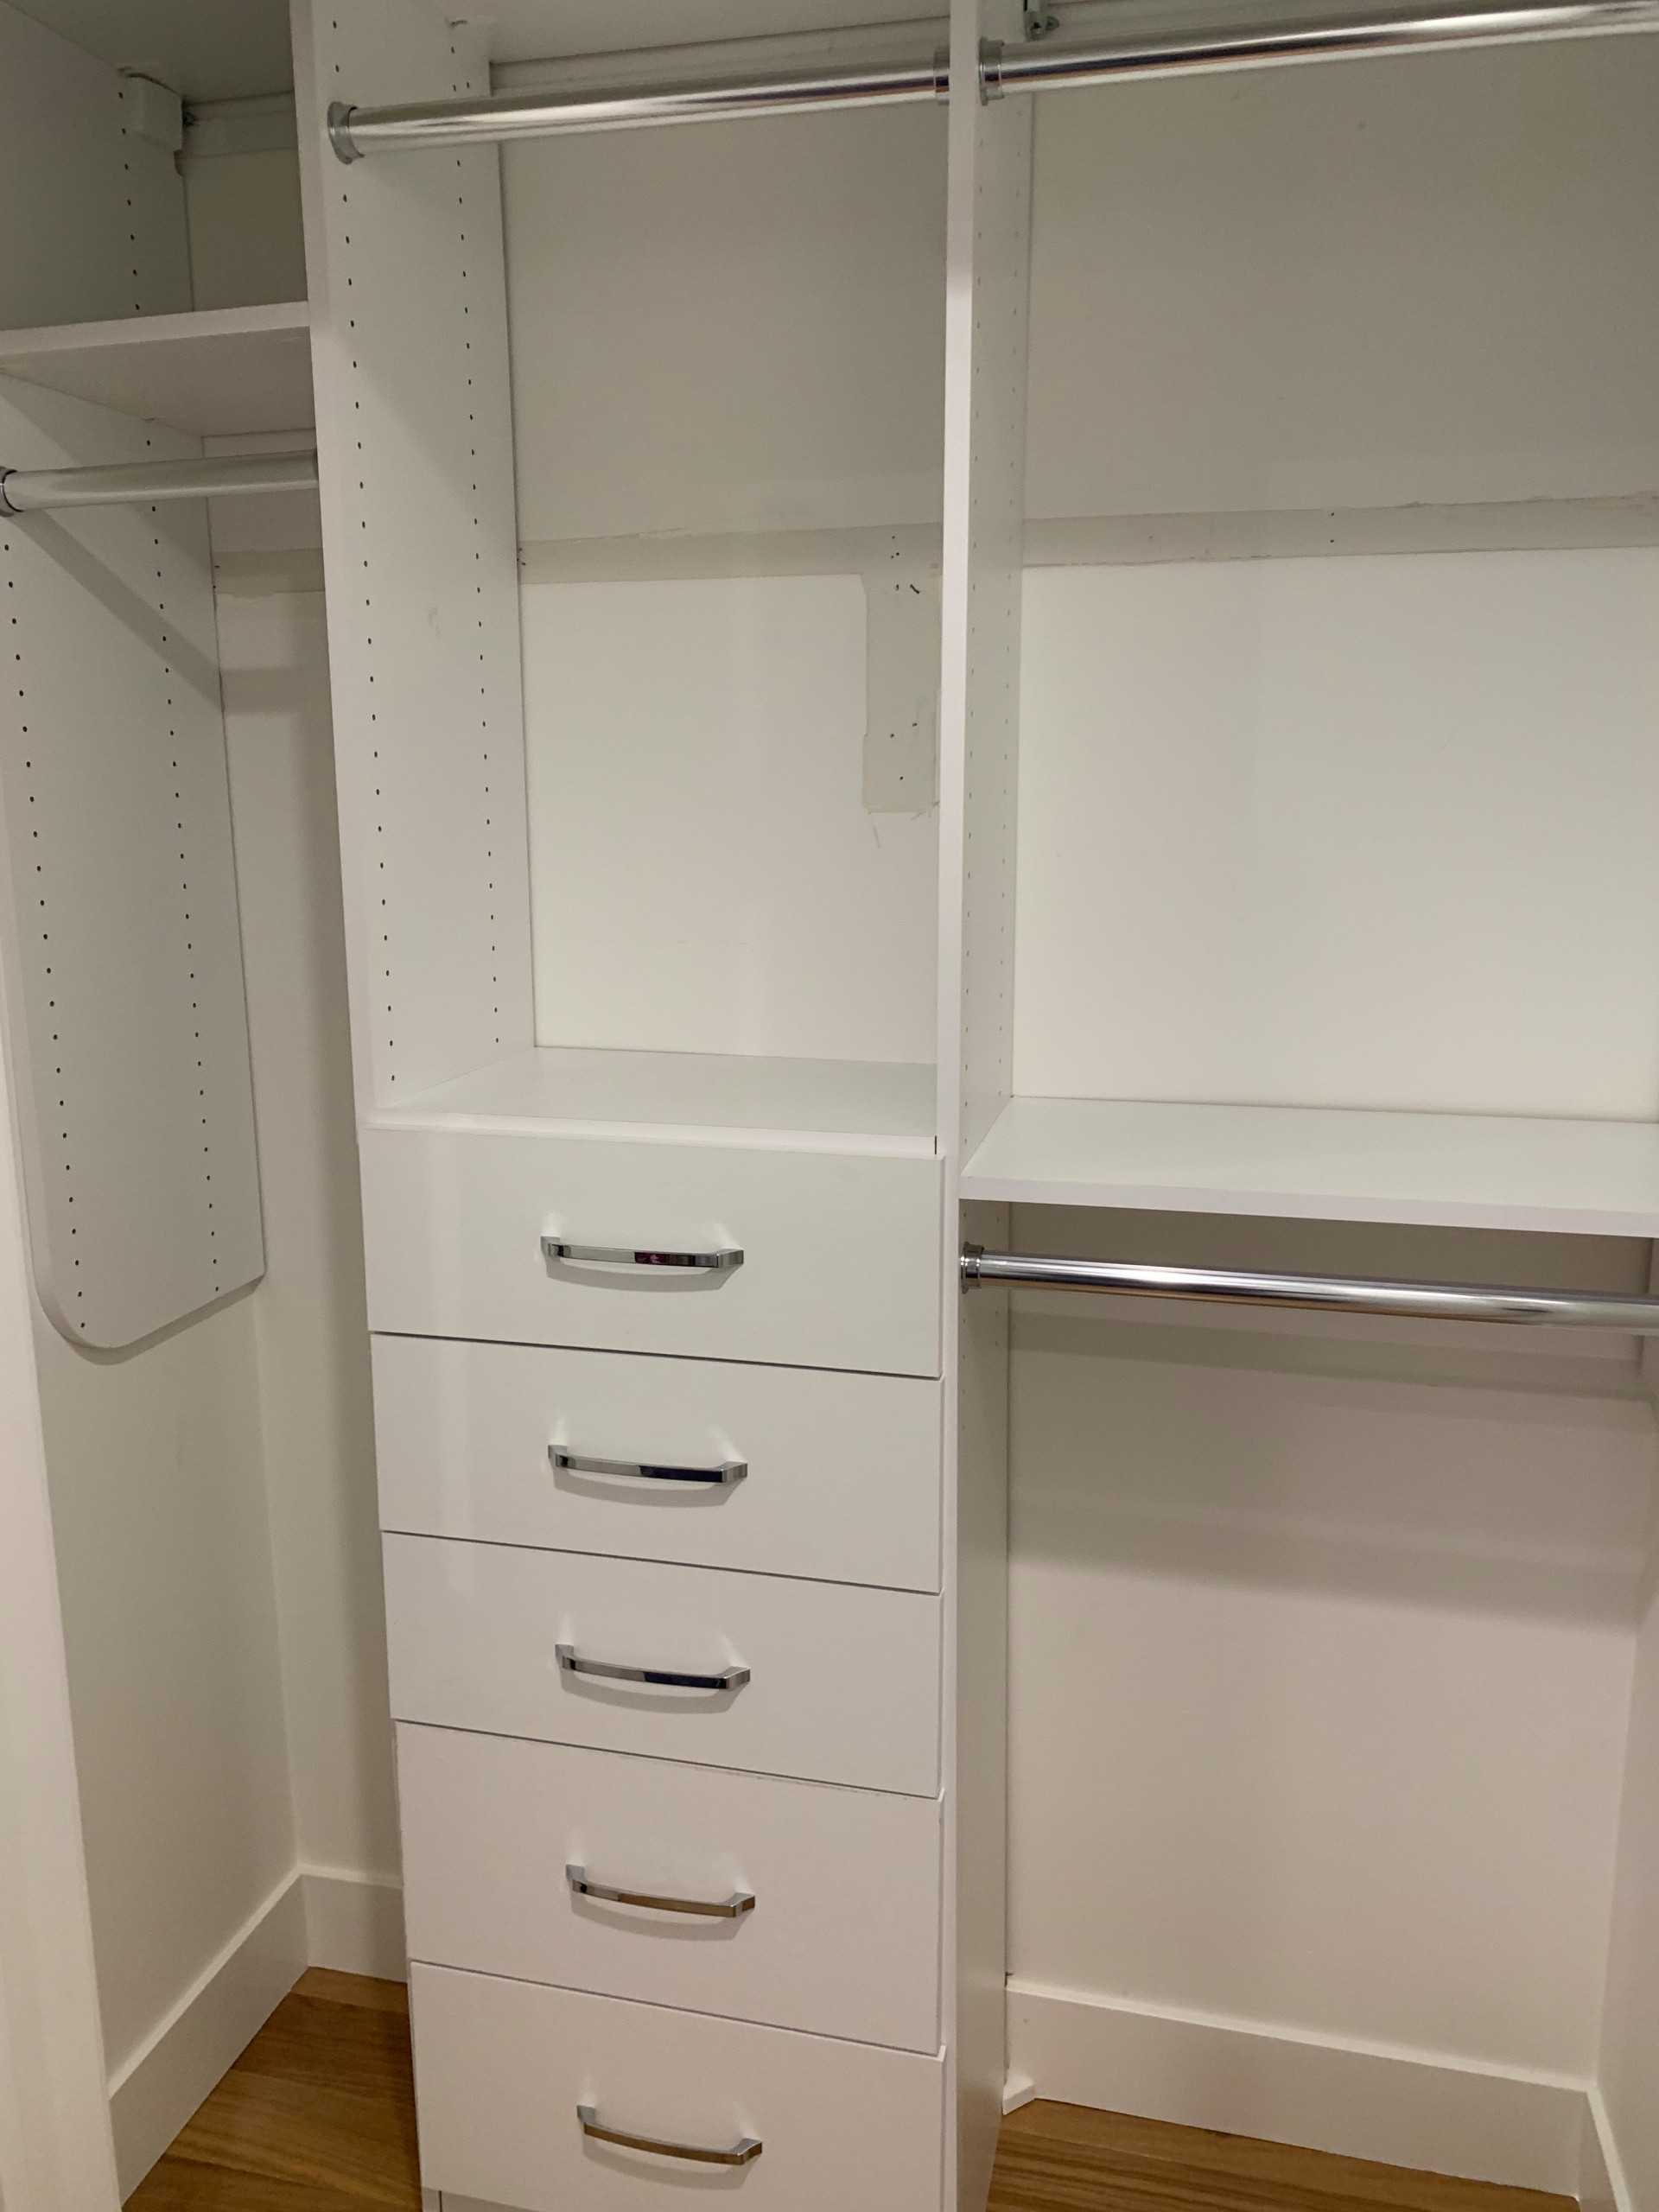 Reach-In Closet Systems